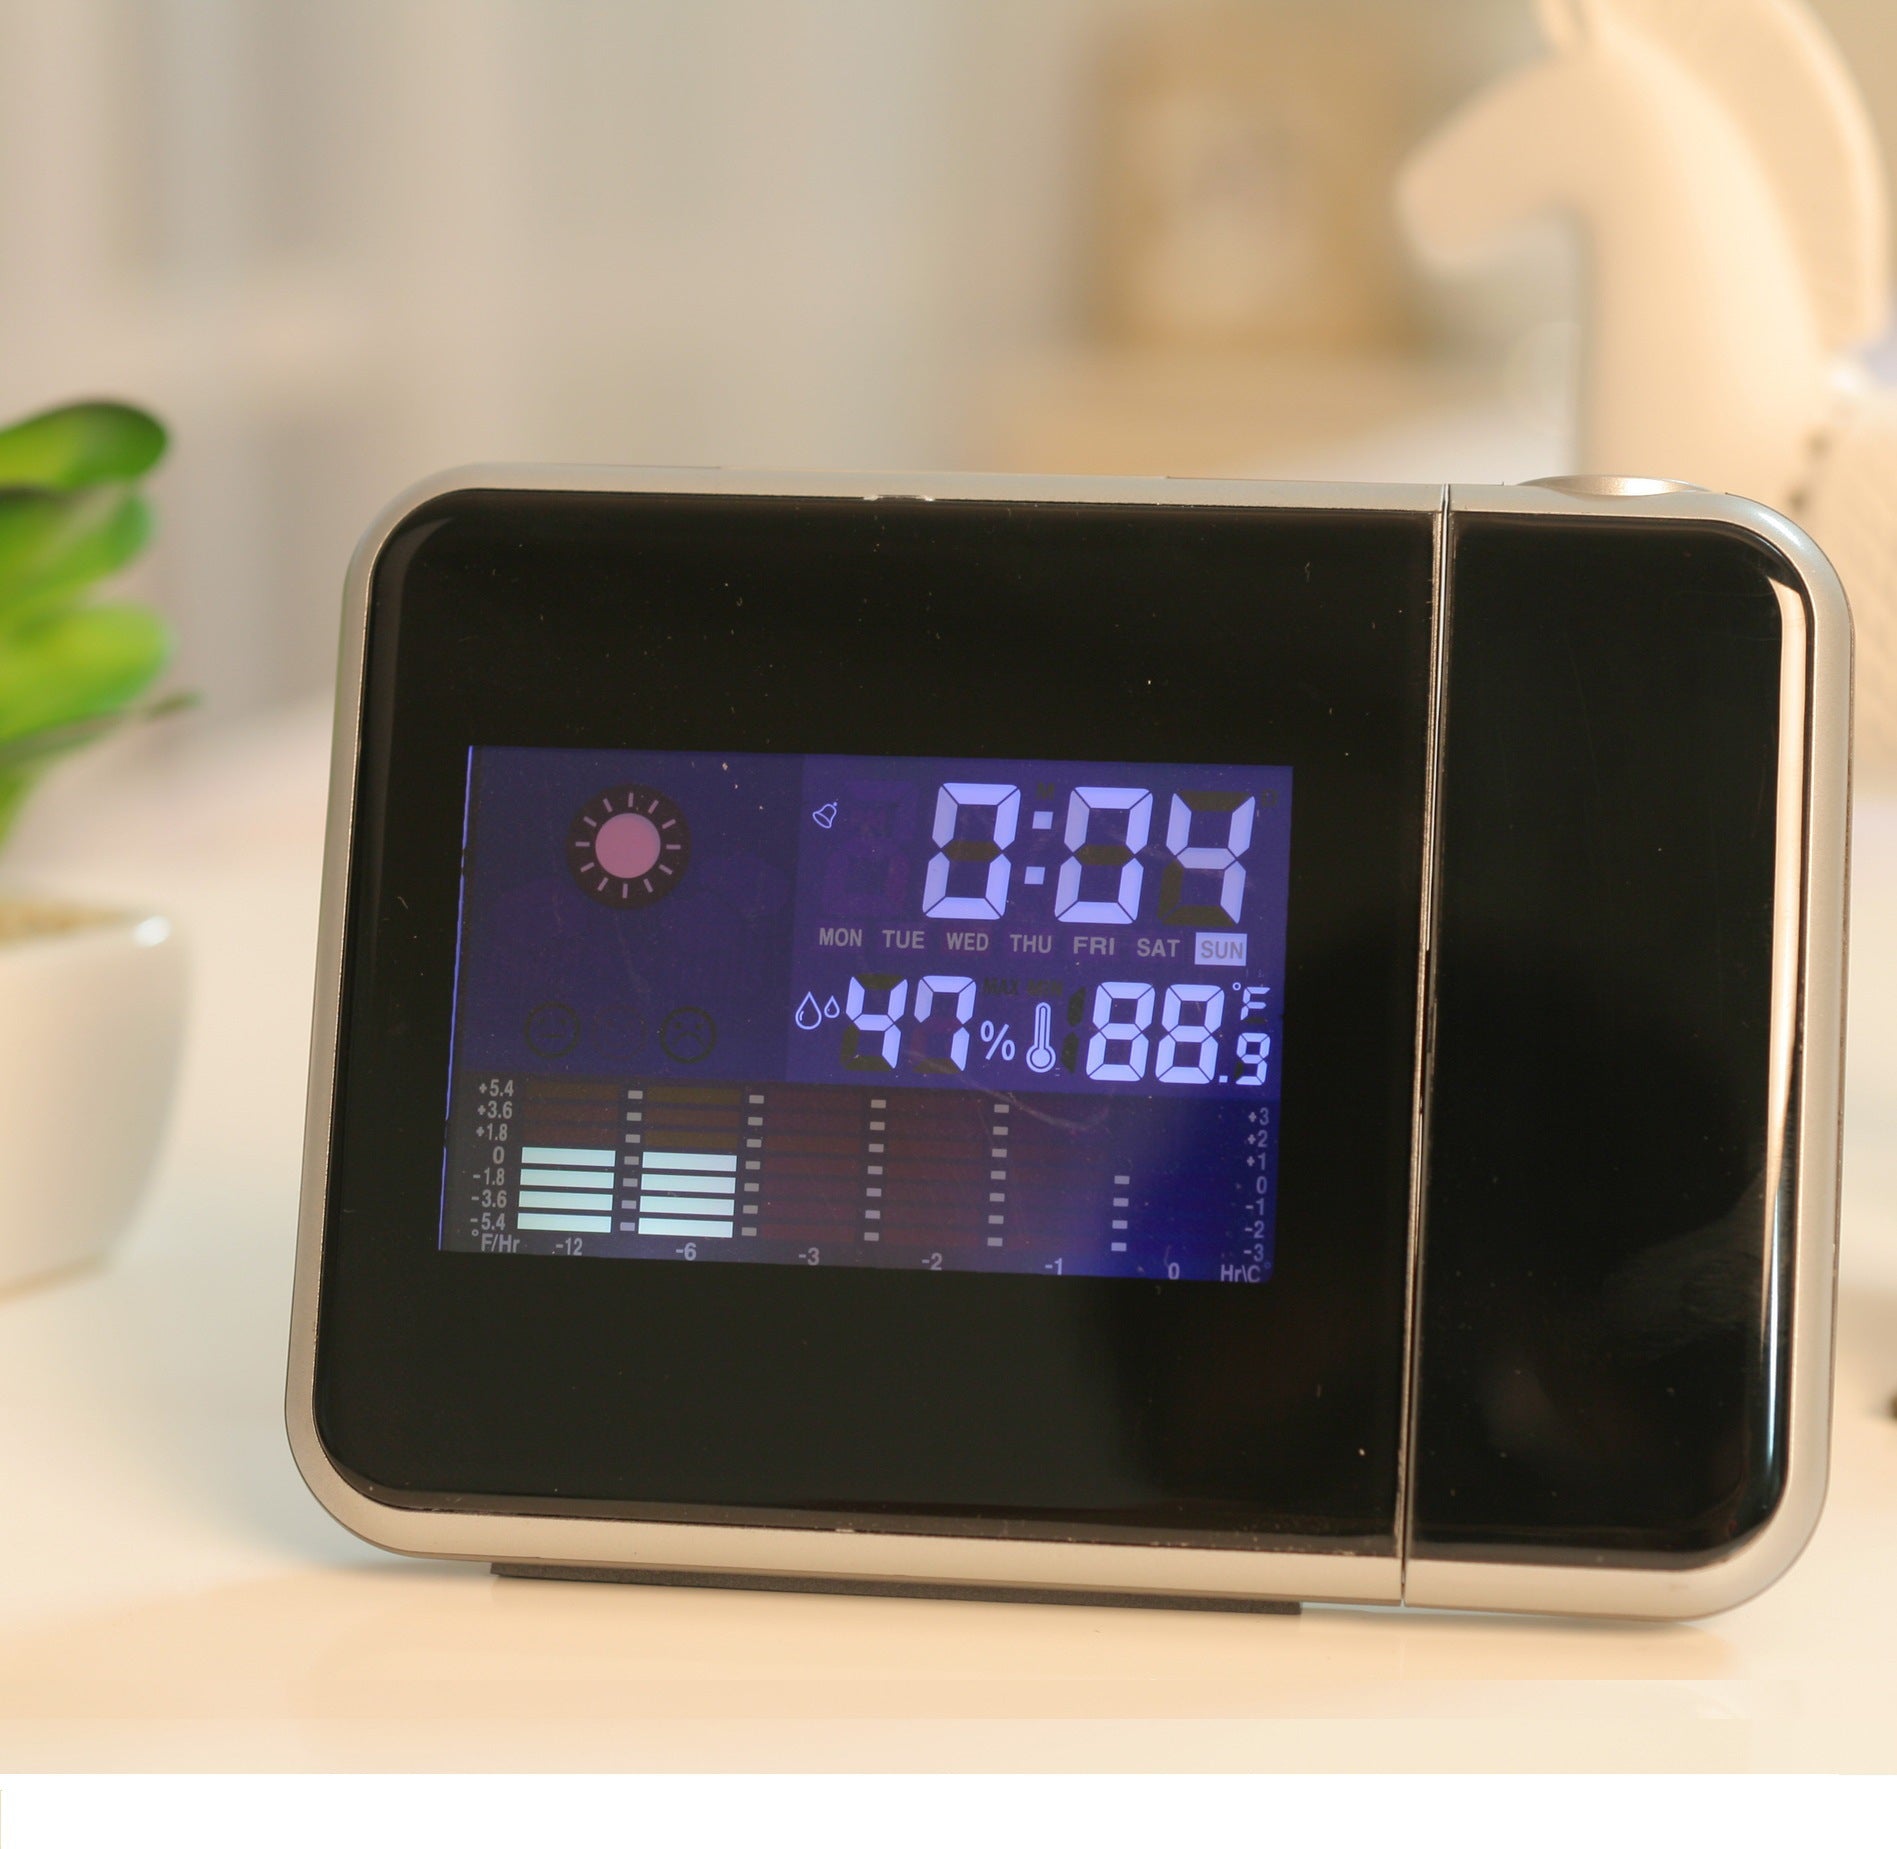 Home Electronic Weather Forecast Projection Clock